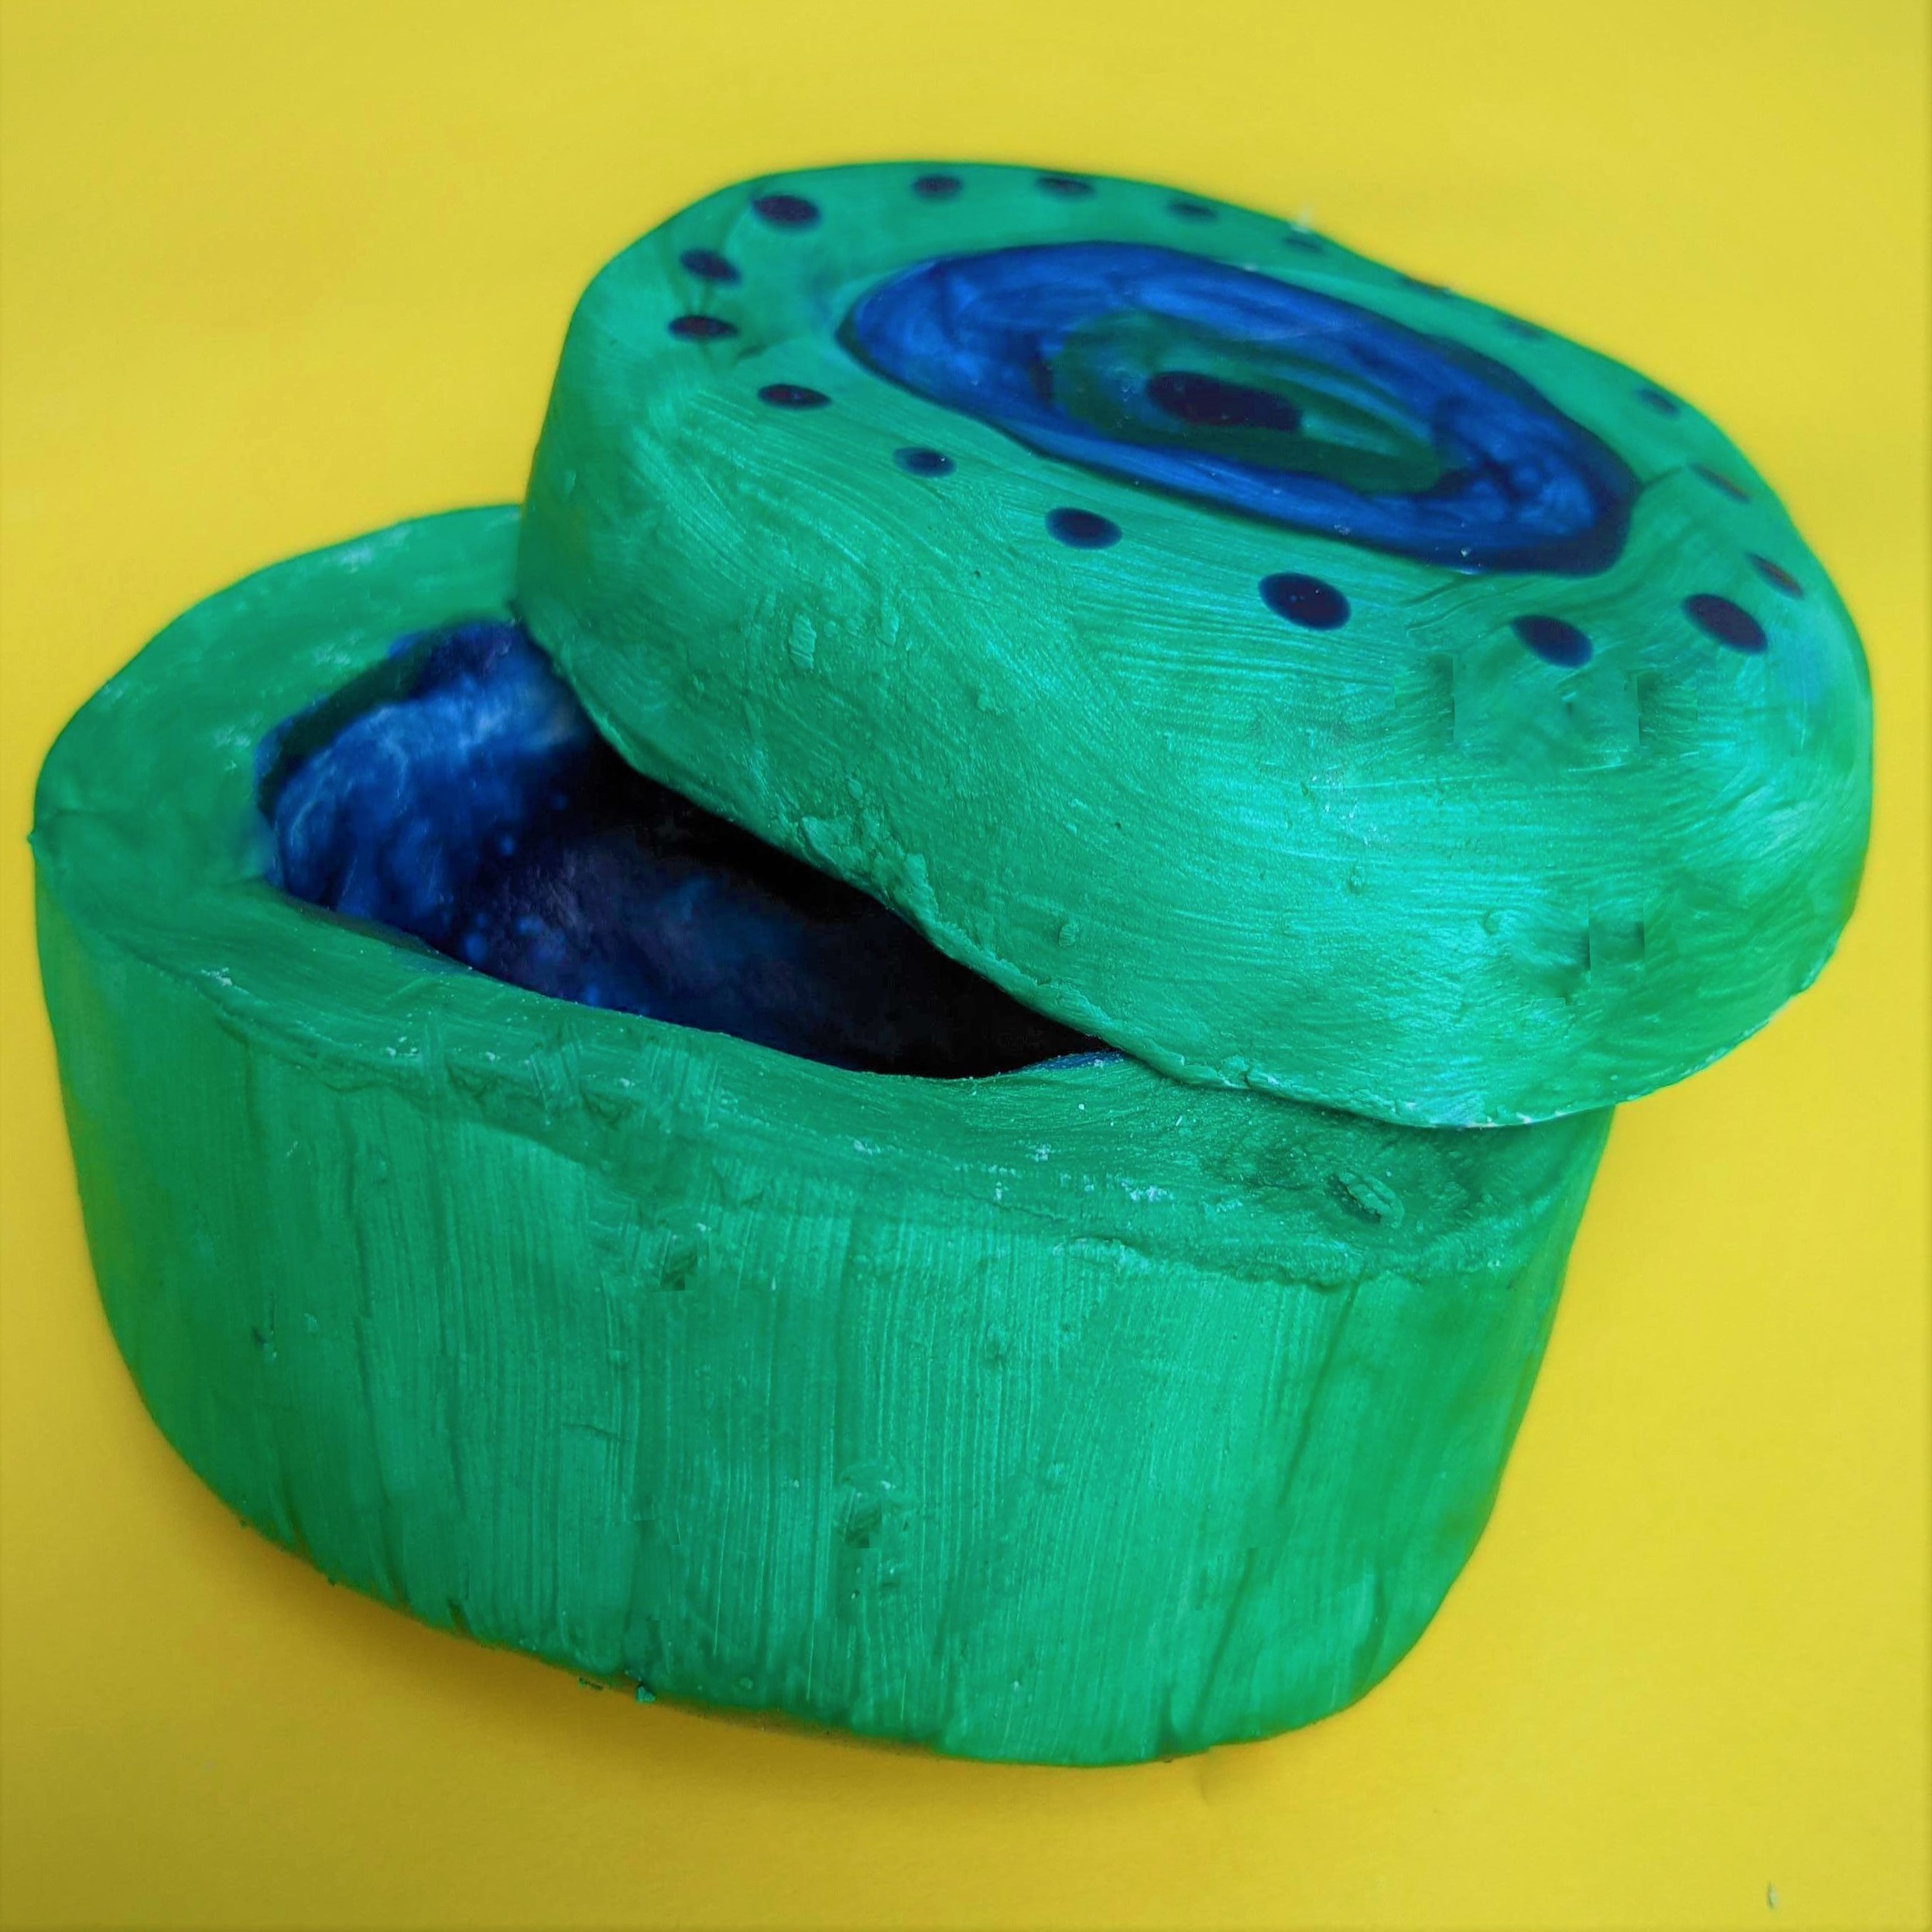 Kidcreate Studio - Chicago Lakeview, Clay Trinket Box Art Project